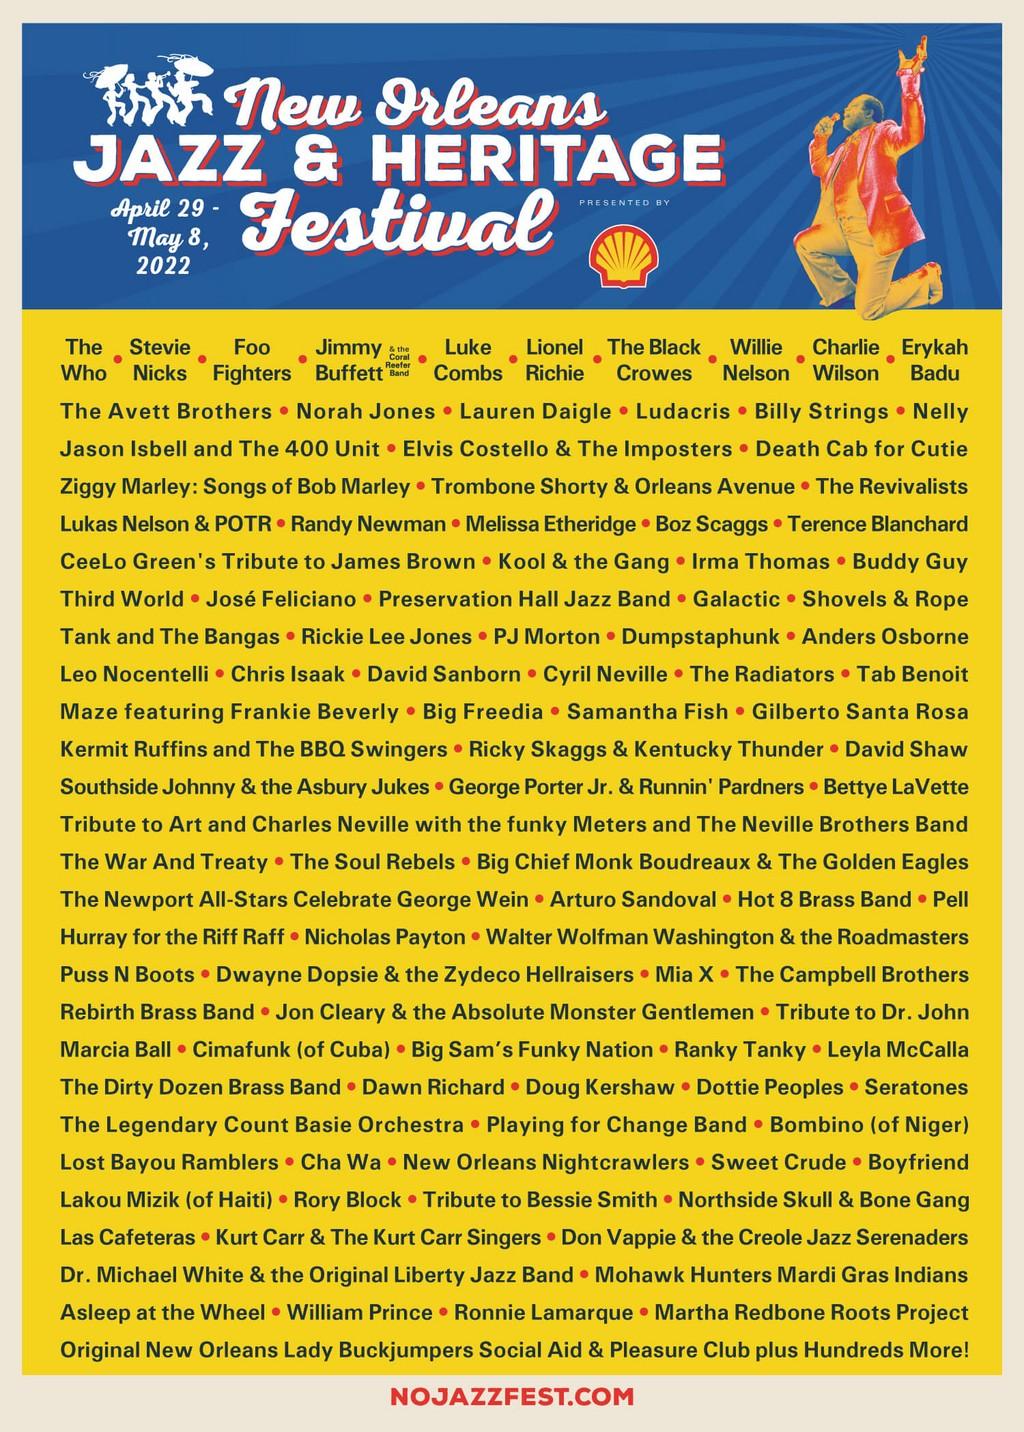 Lineup Poster New Orleans Jazz & Heritage Festival 2022